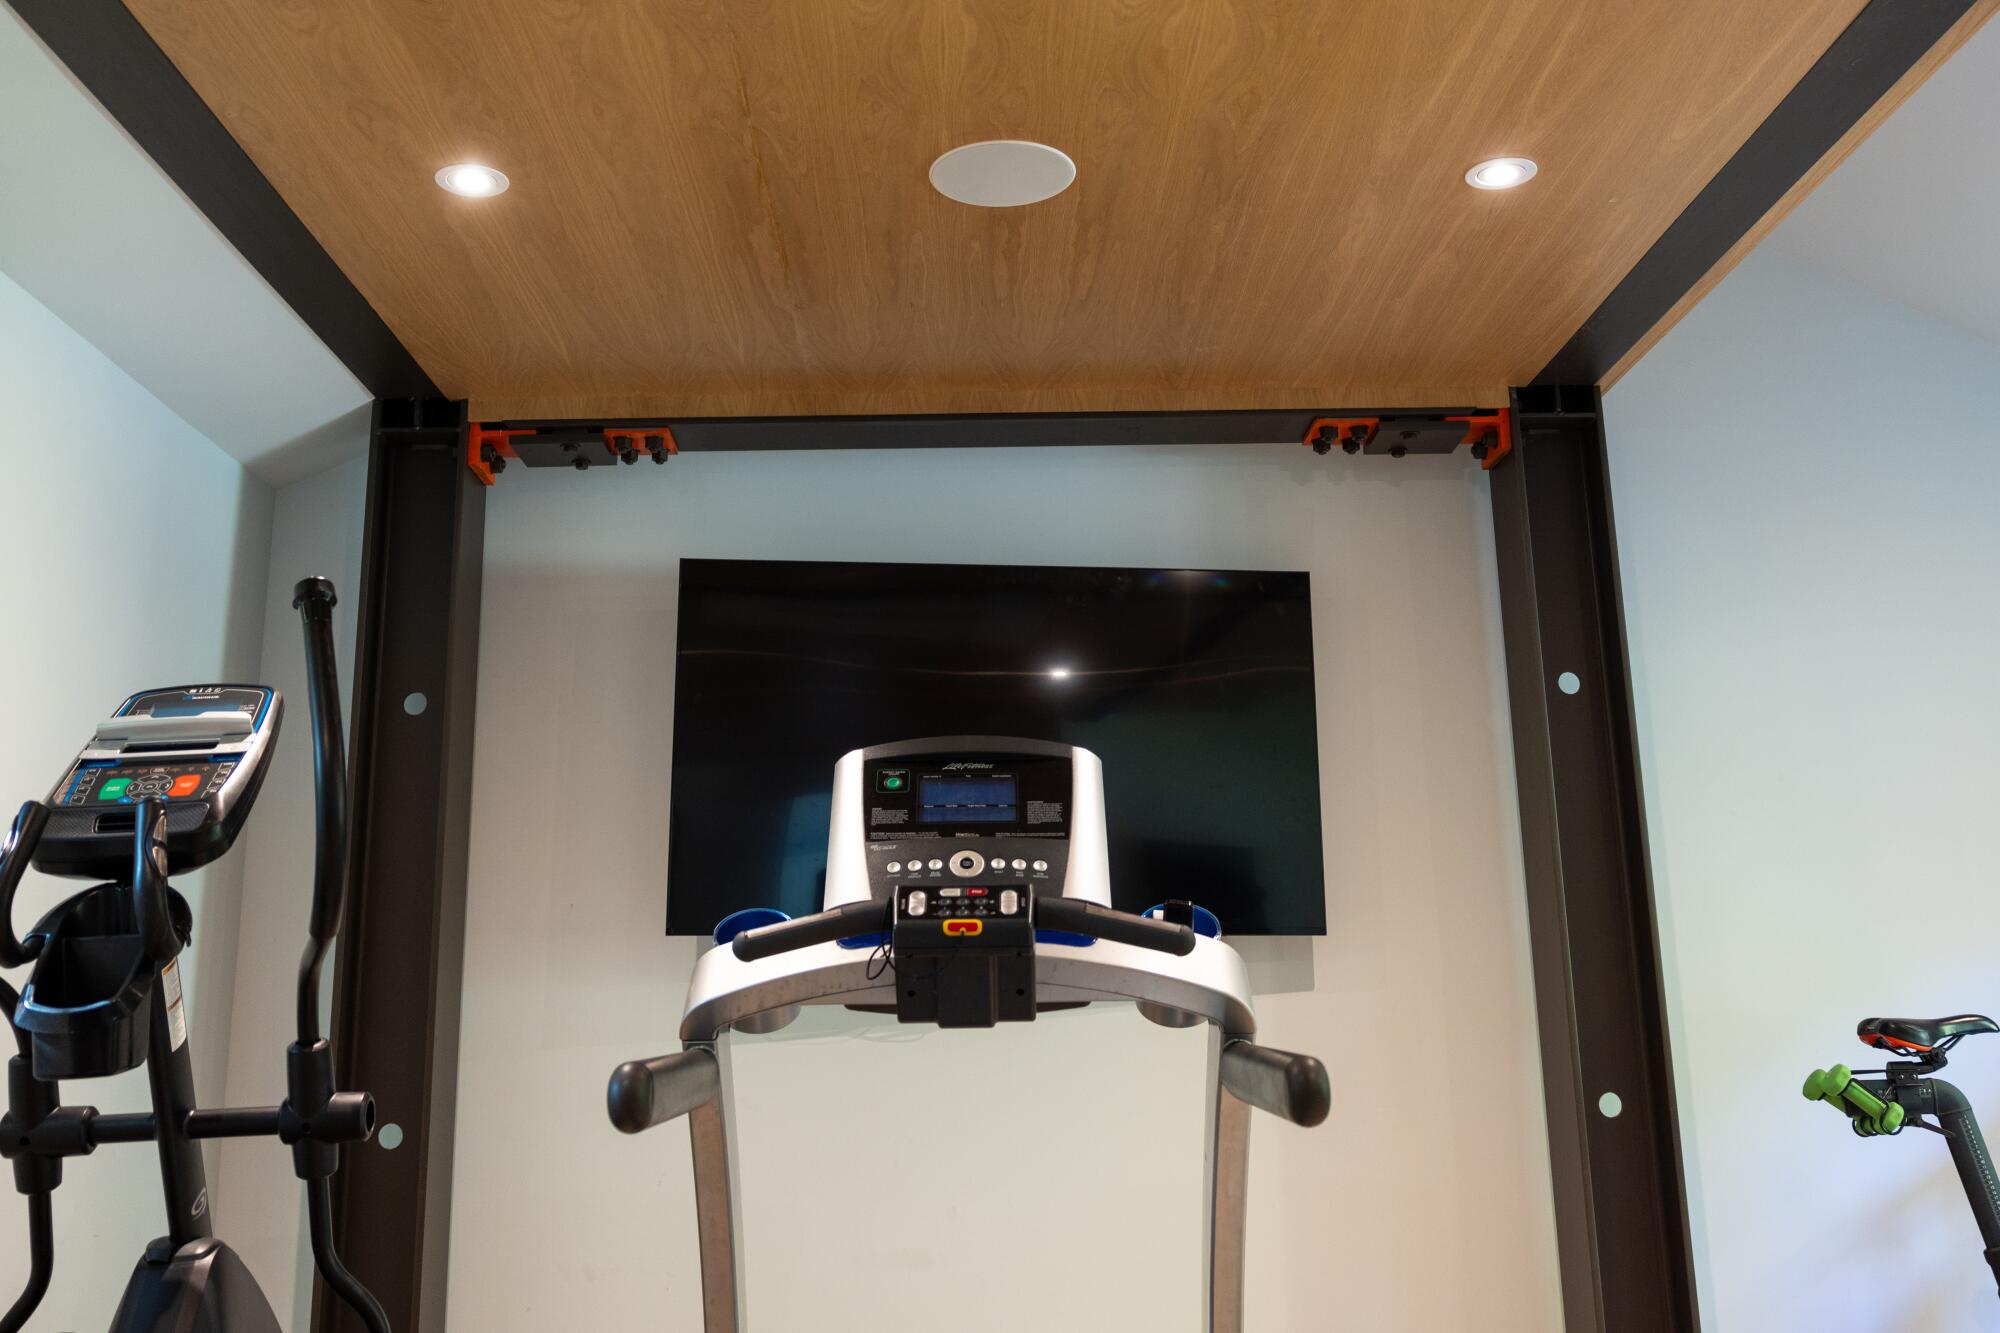 Exercise equipment in a home gym